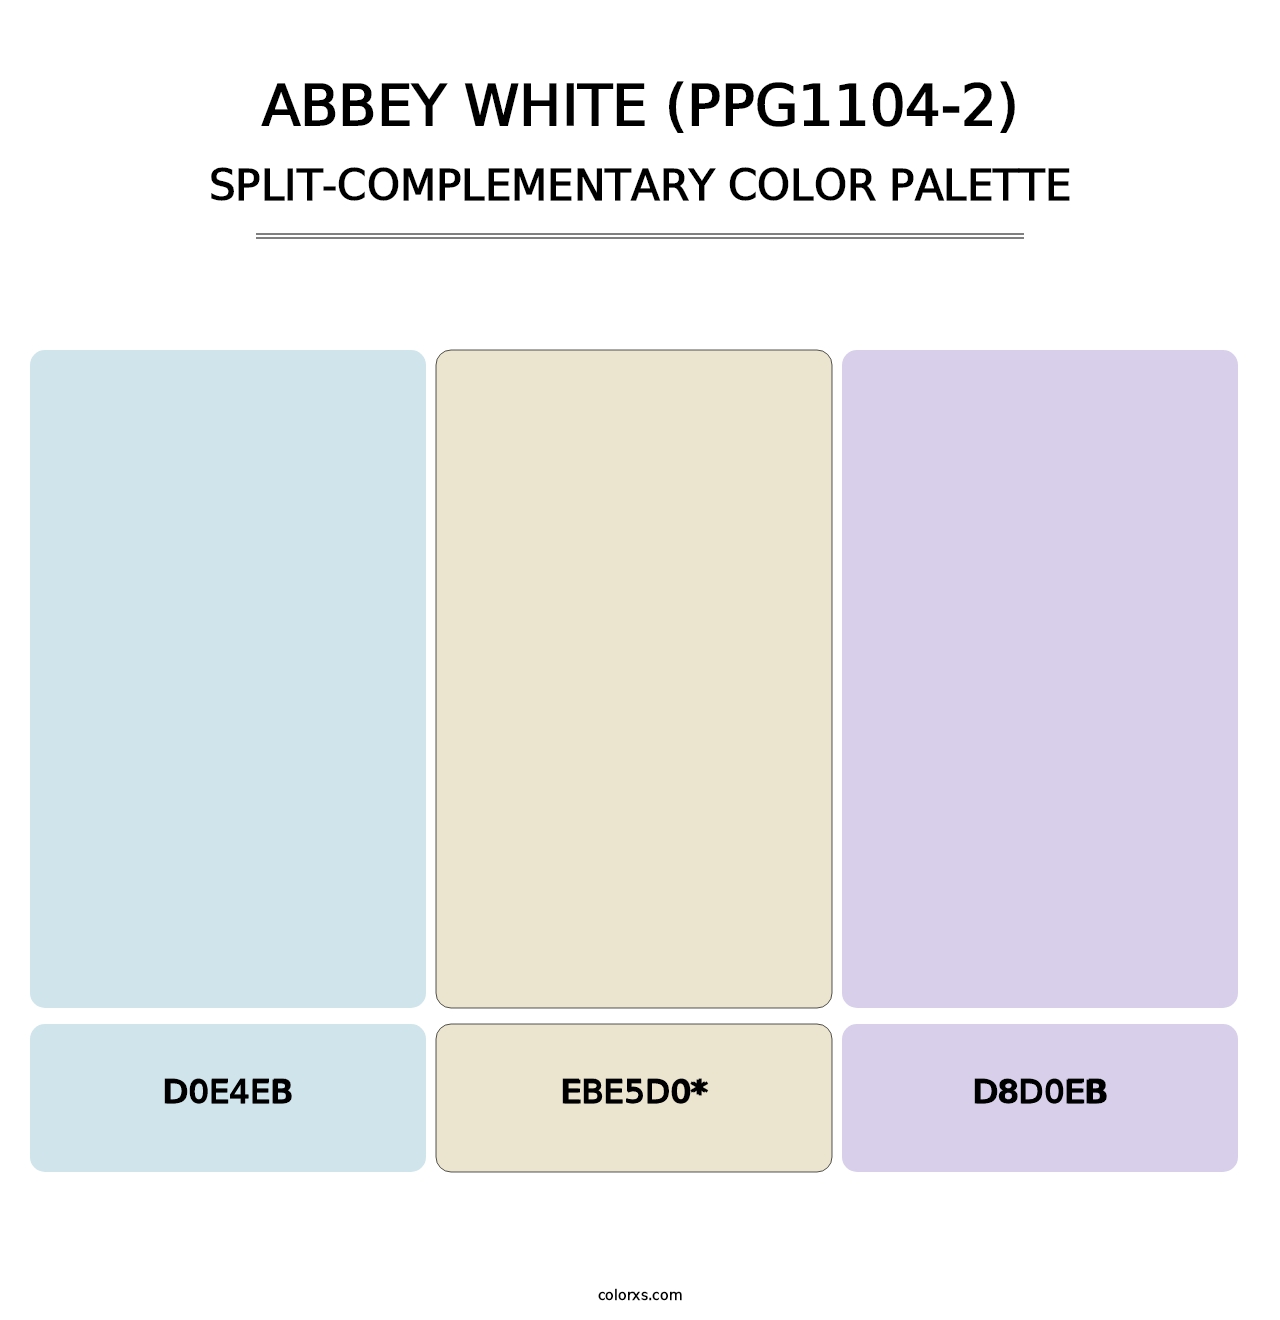 Abbey White (PPG1104-2) - Split-Complementary Color Palette